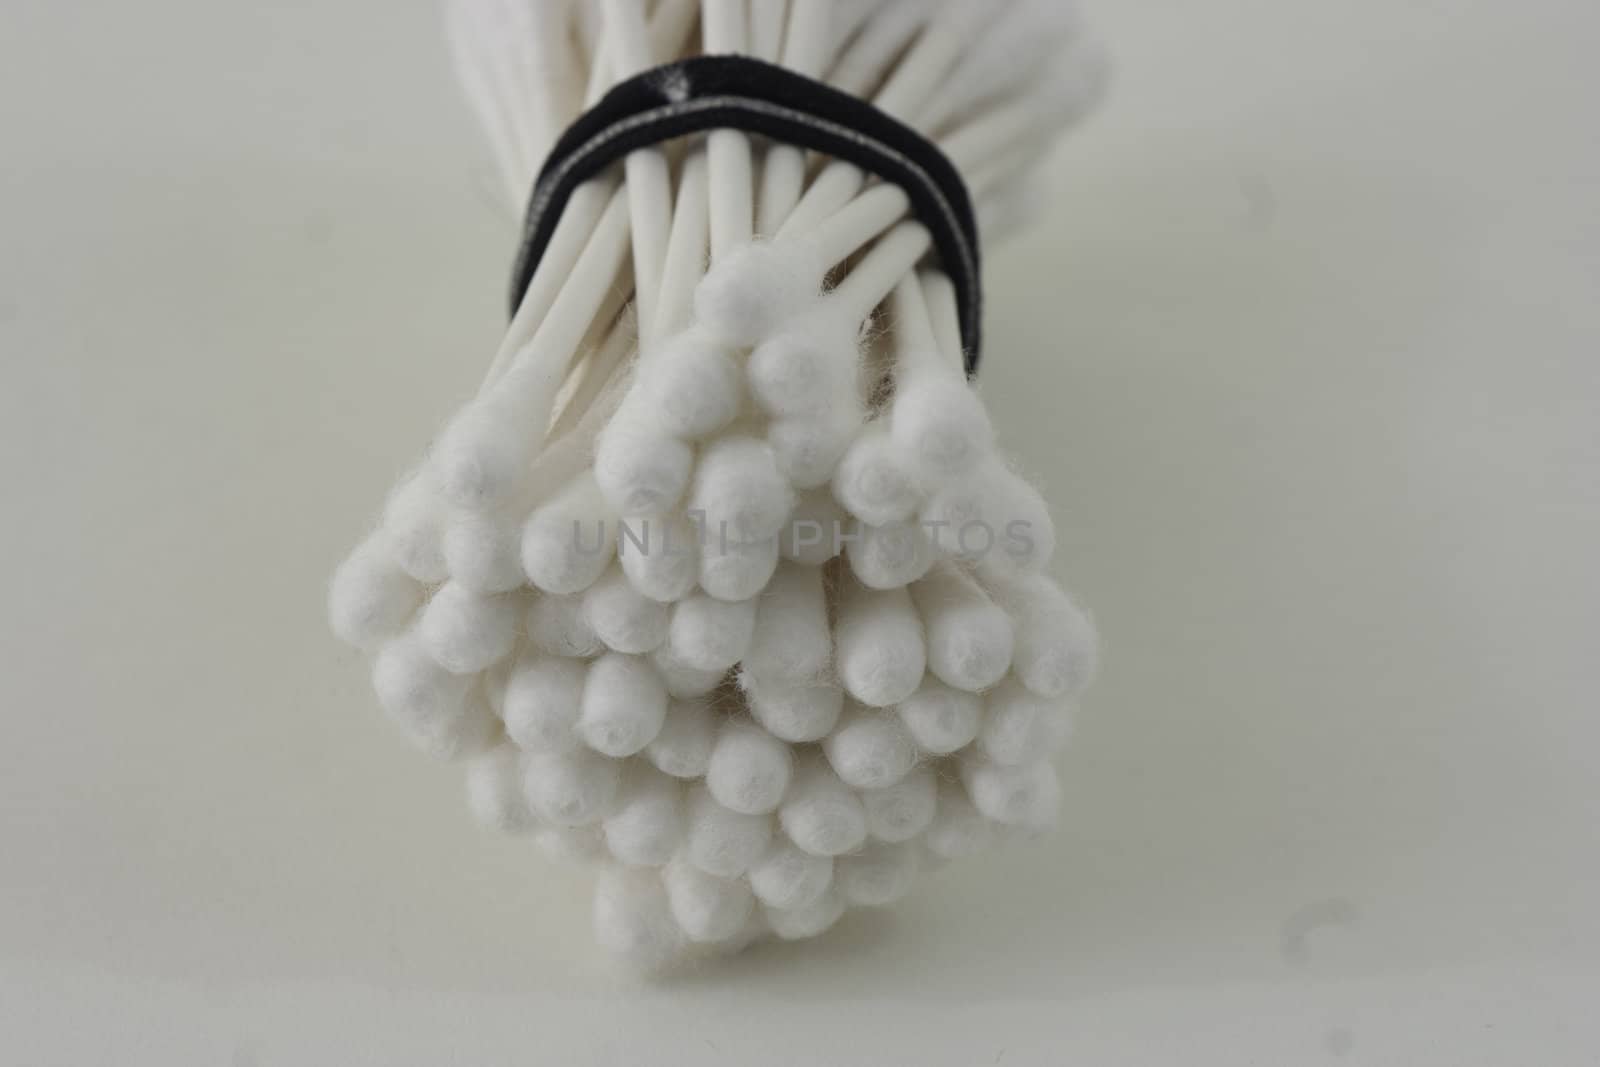 A bundle of cotton swabs on white background.